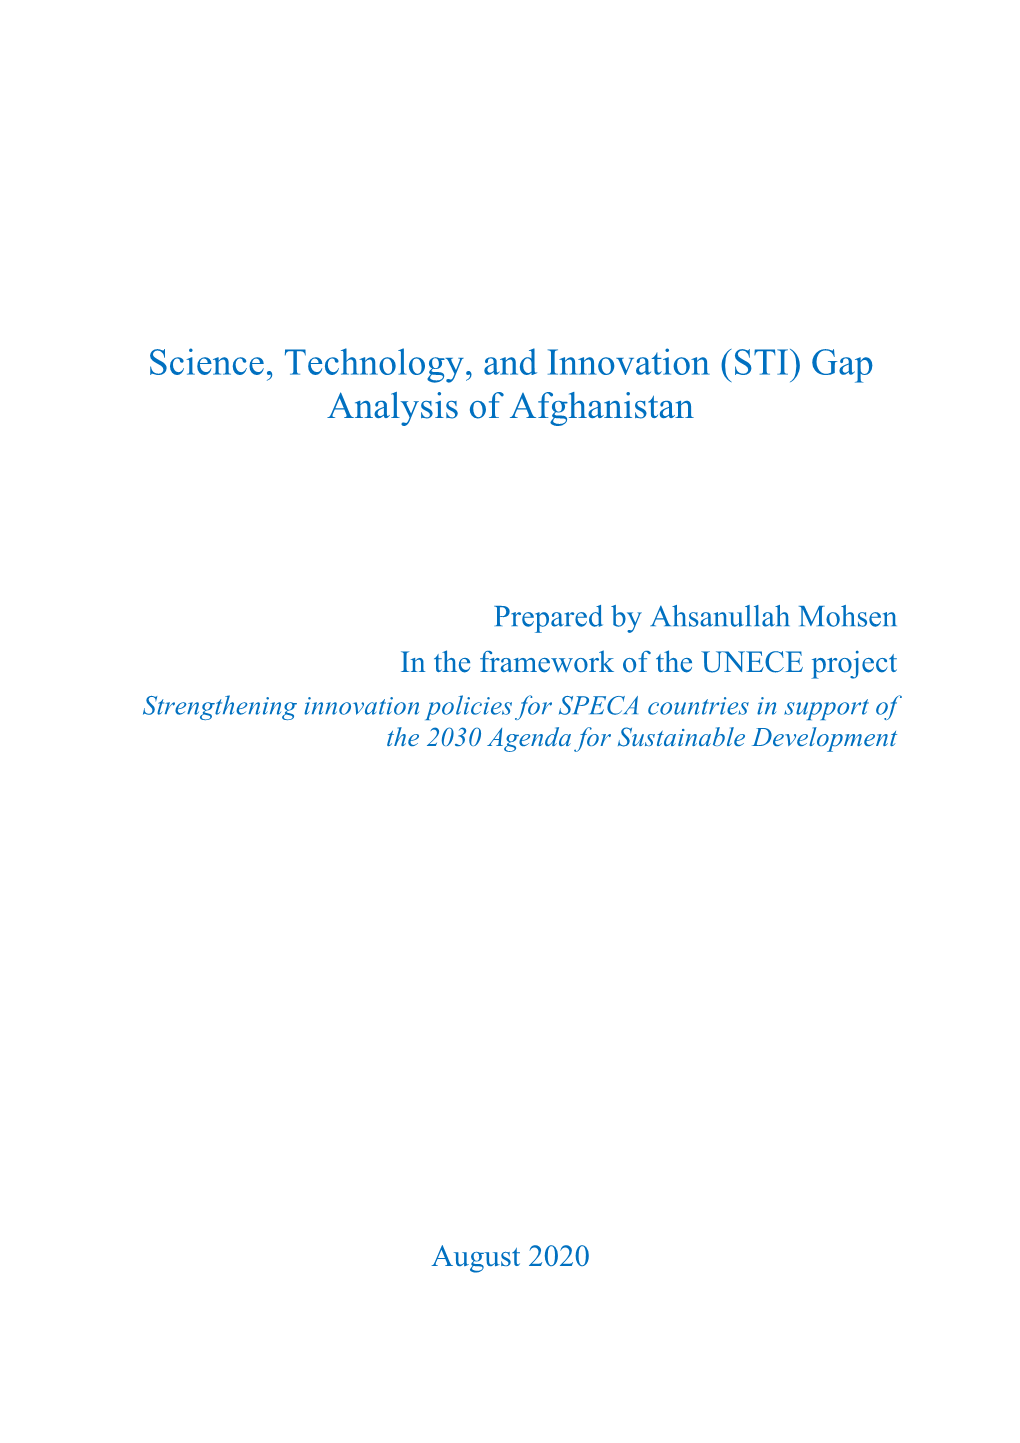 Science, Technology, and Innovation (STI) Gap Analysis of Afghanistan